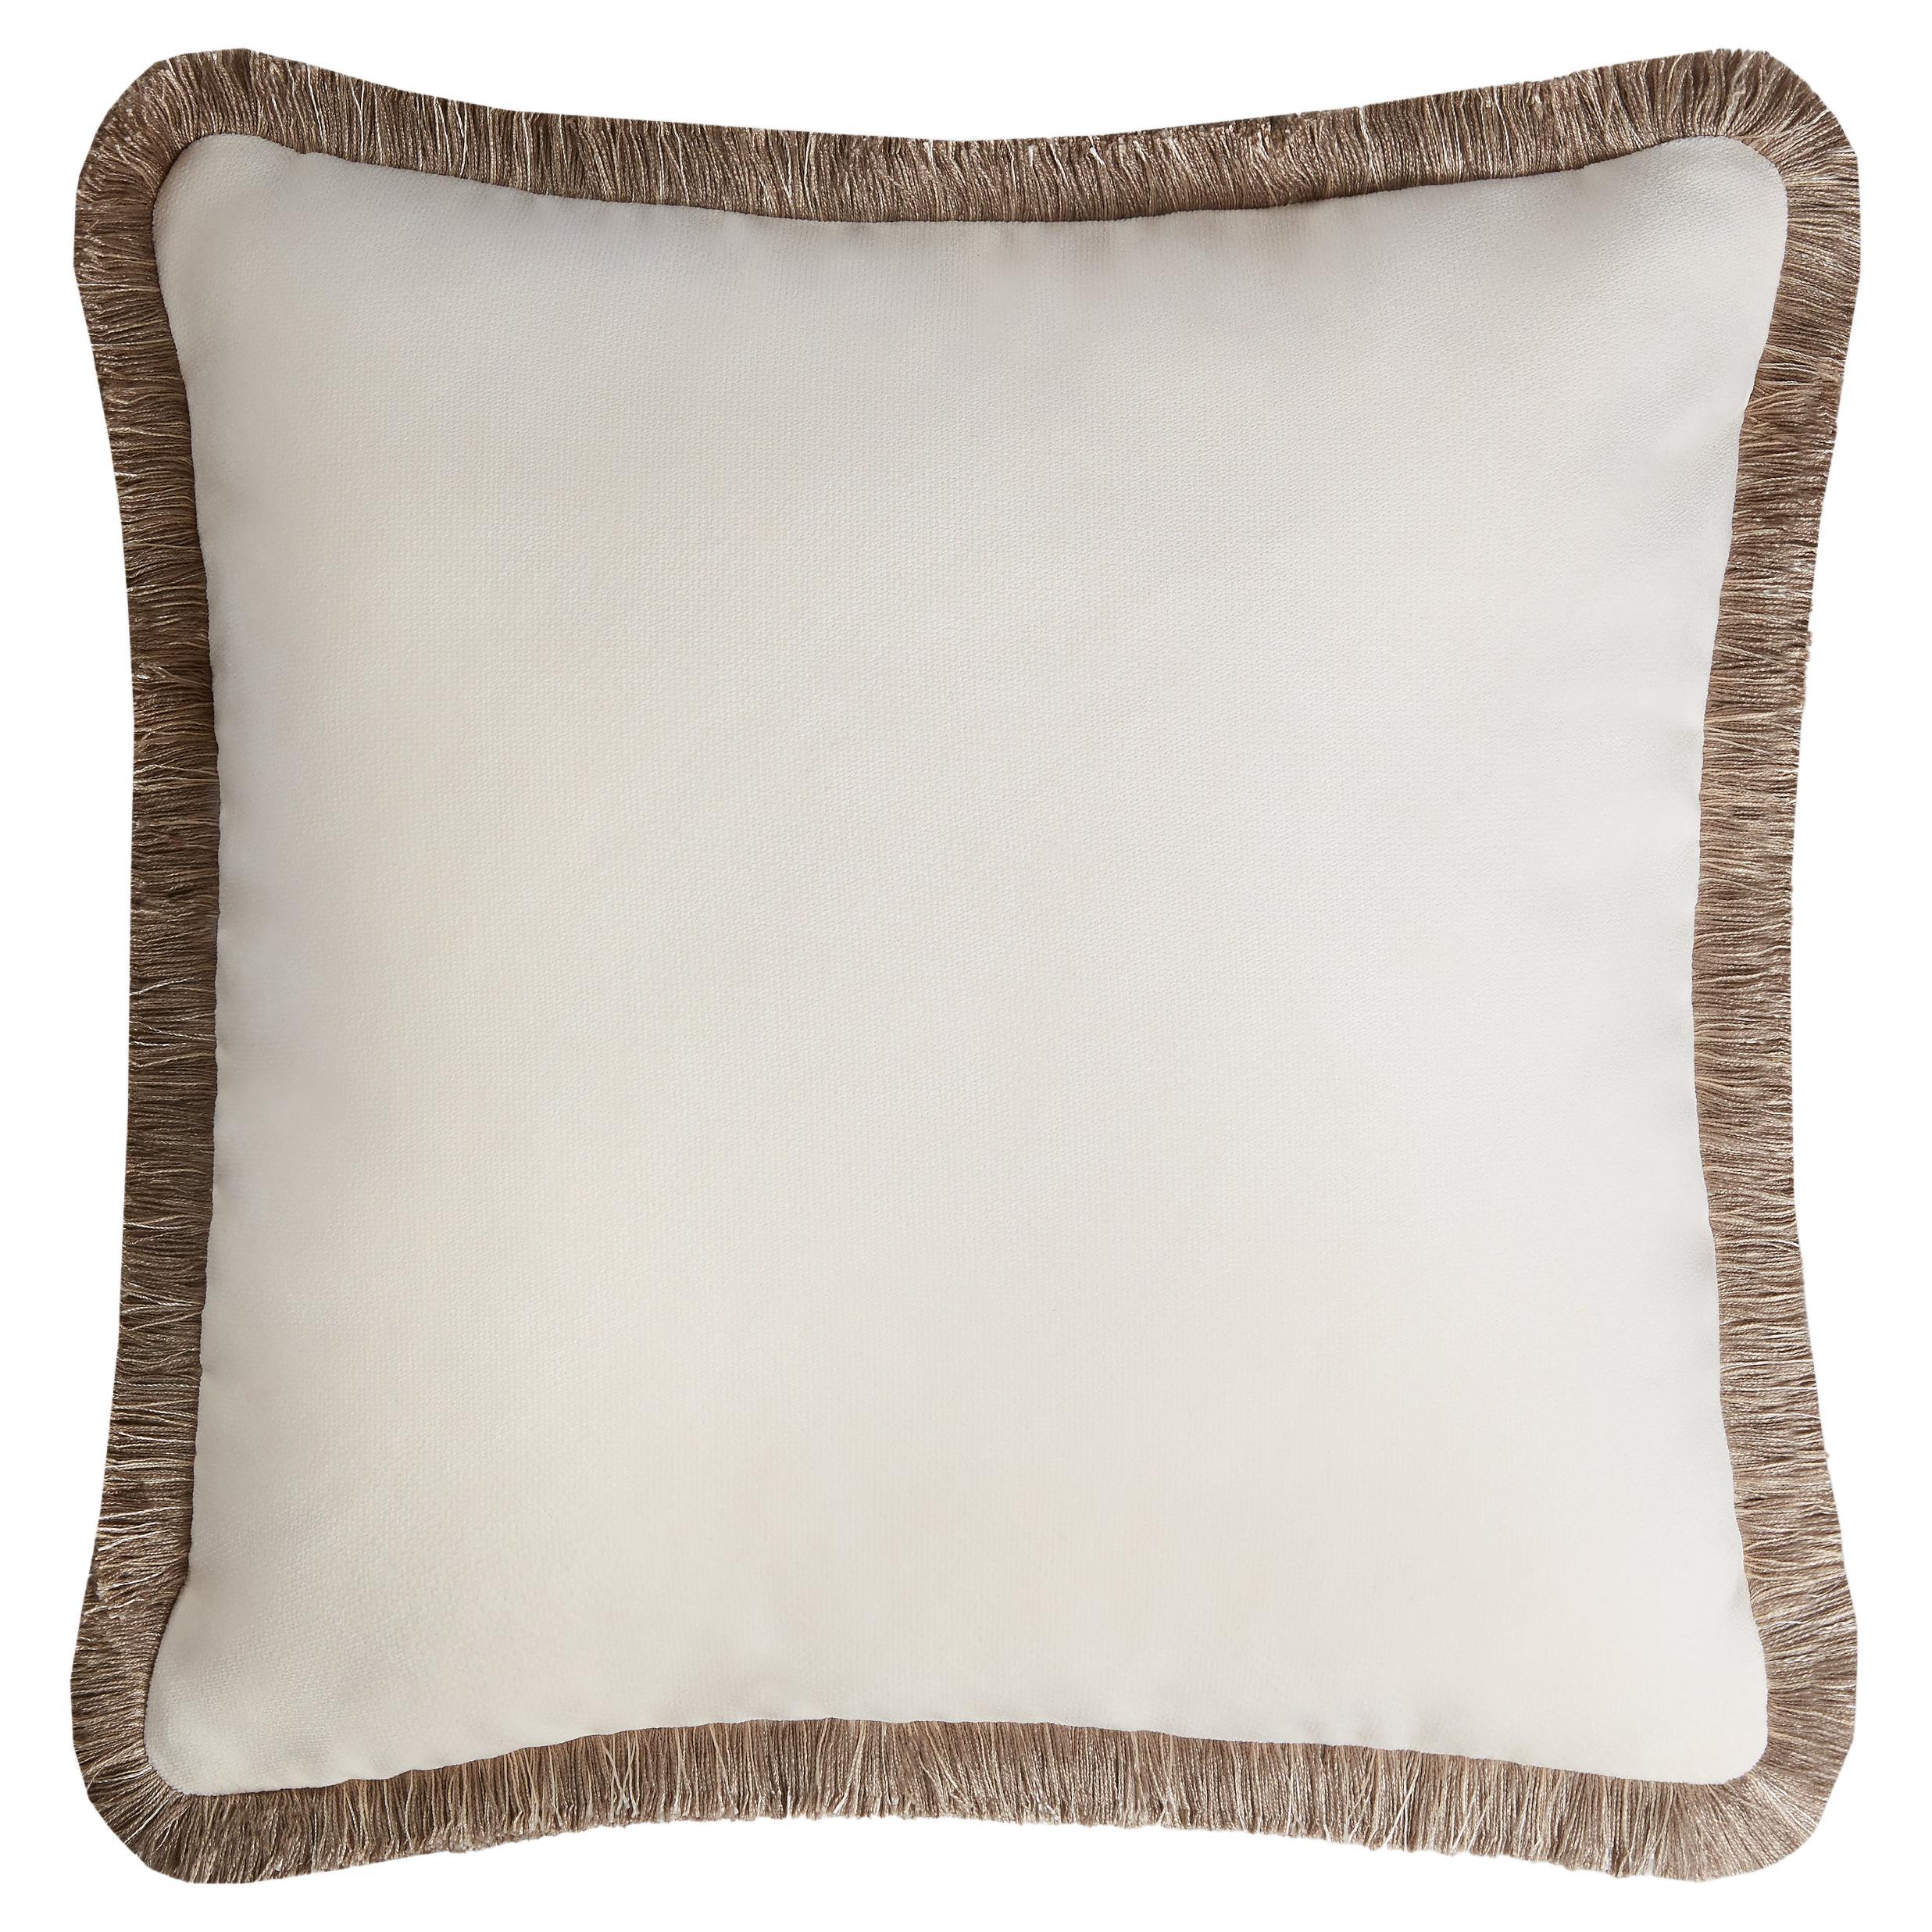 Happy Pillow Sahara White with Multicolor Fringes